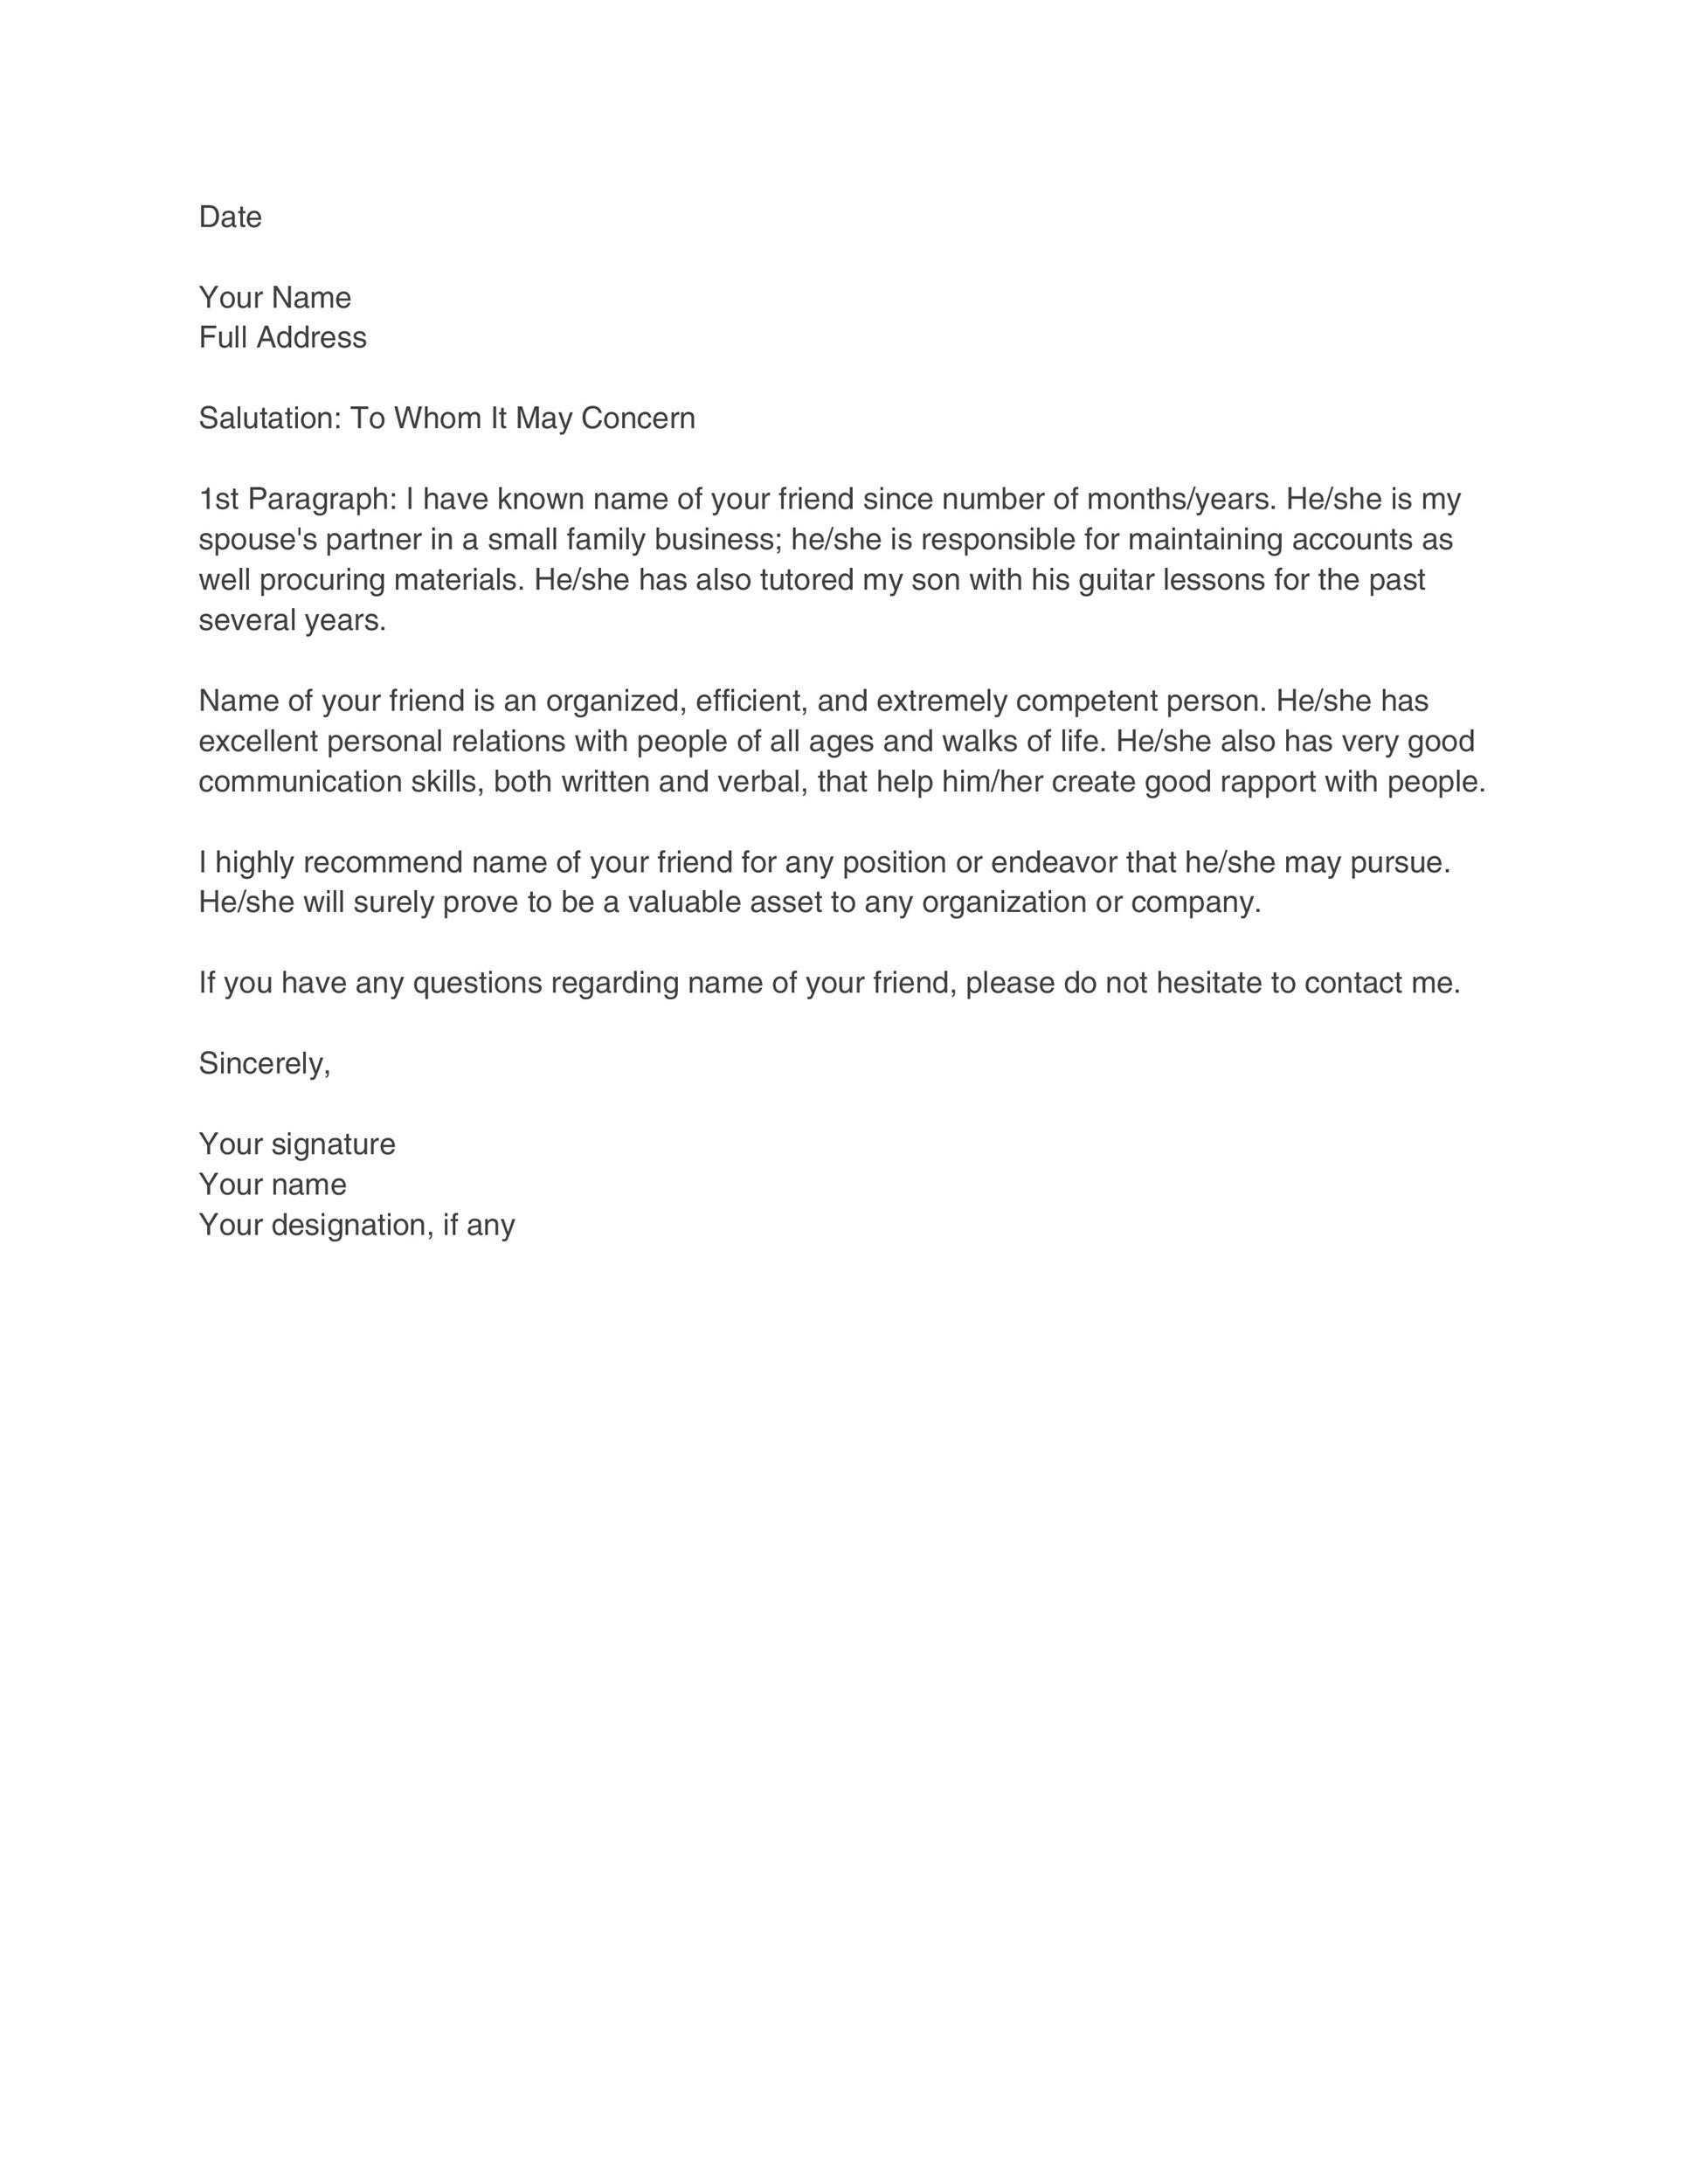 Sample Of A Personal Reference Letter from templatelab.com